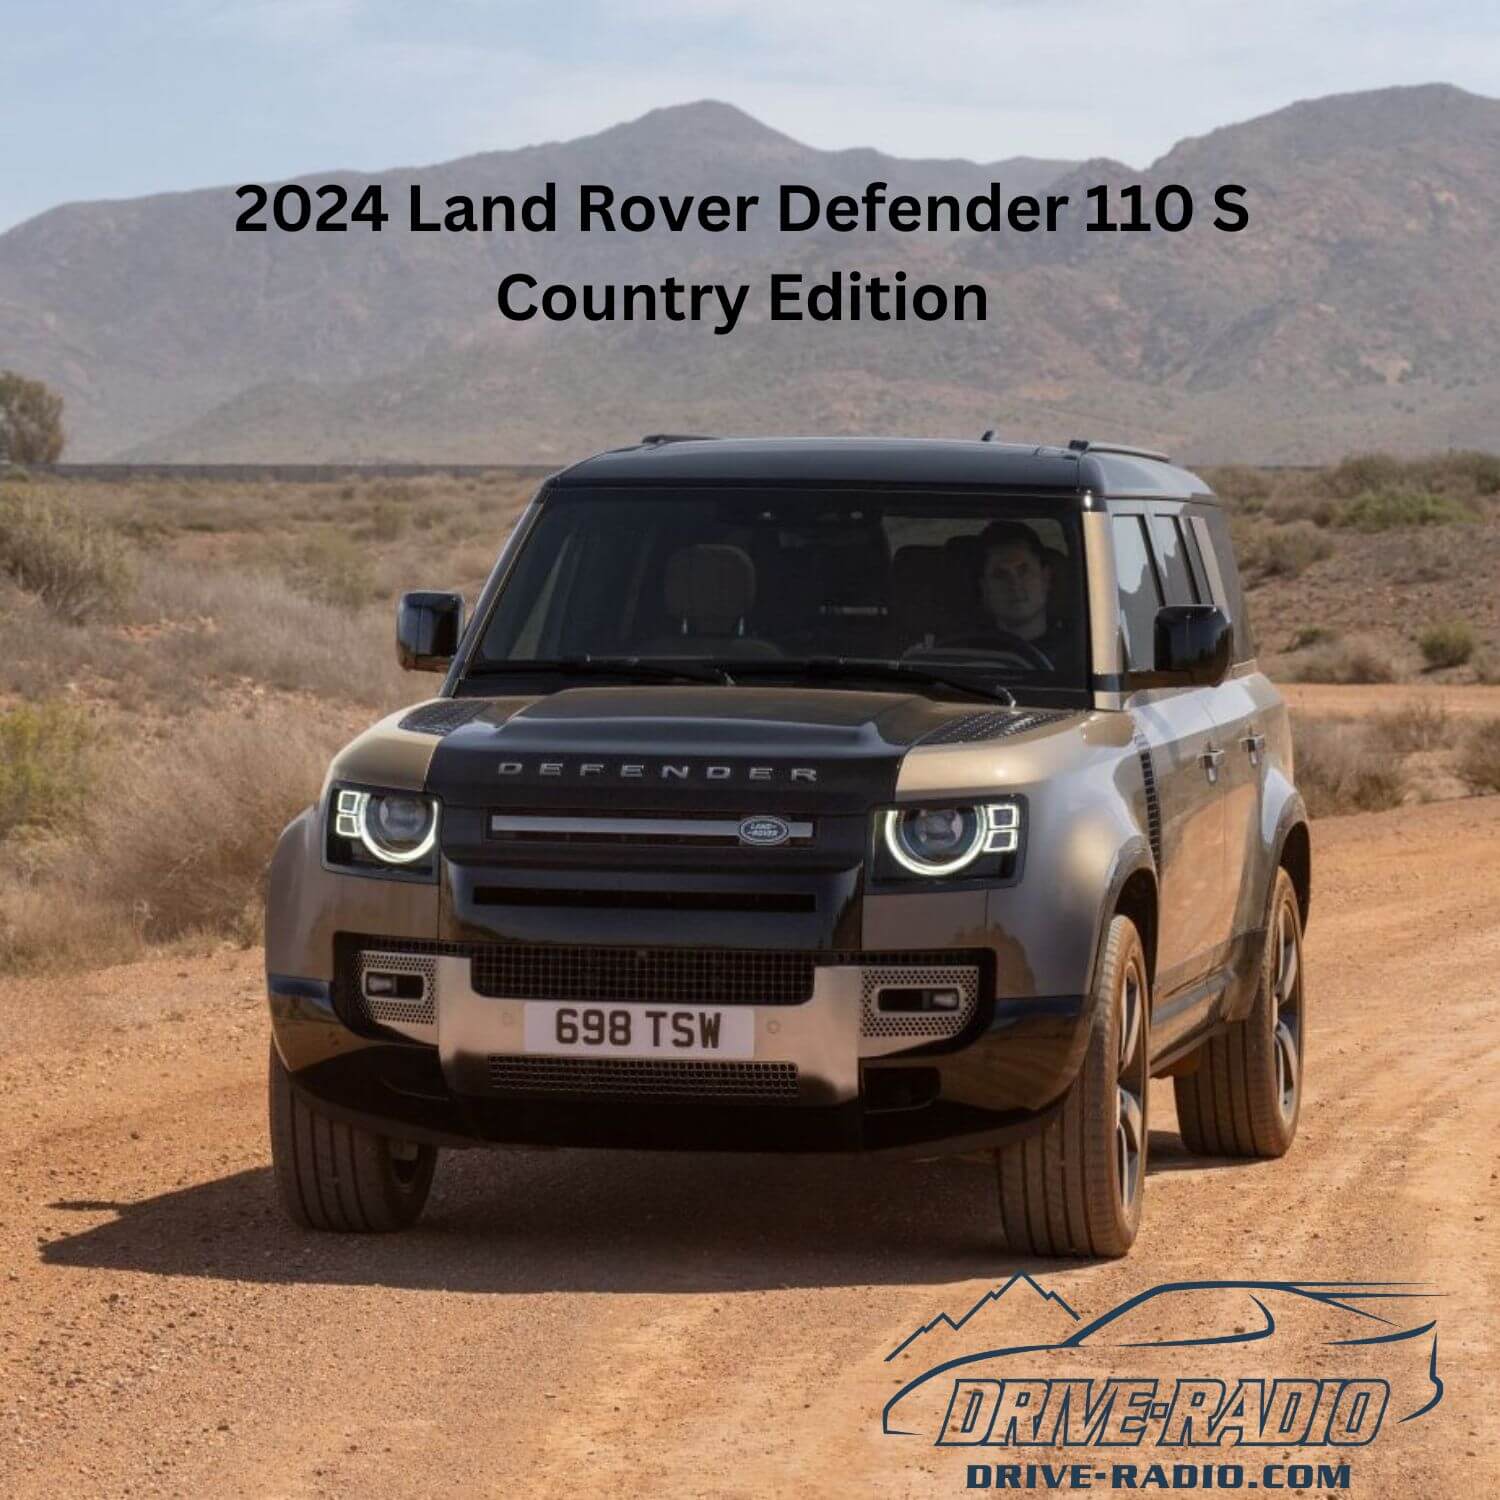 2024 Land Rover Defender 110 S Country Edition